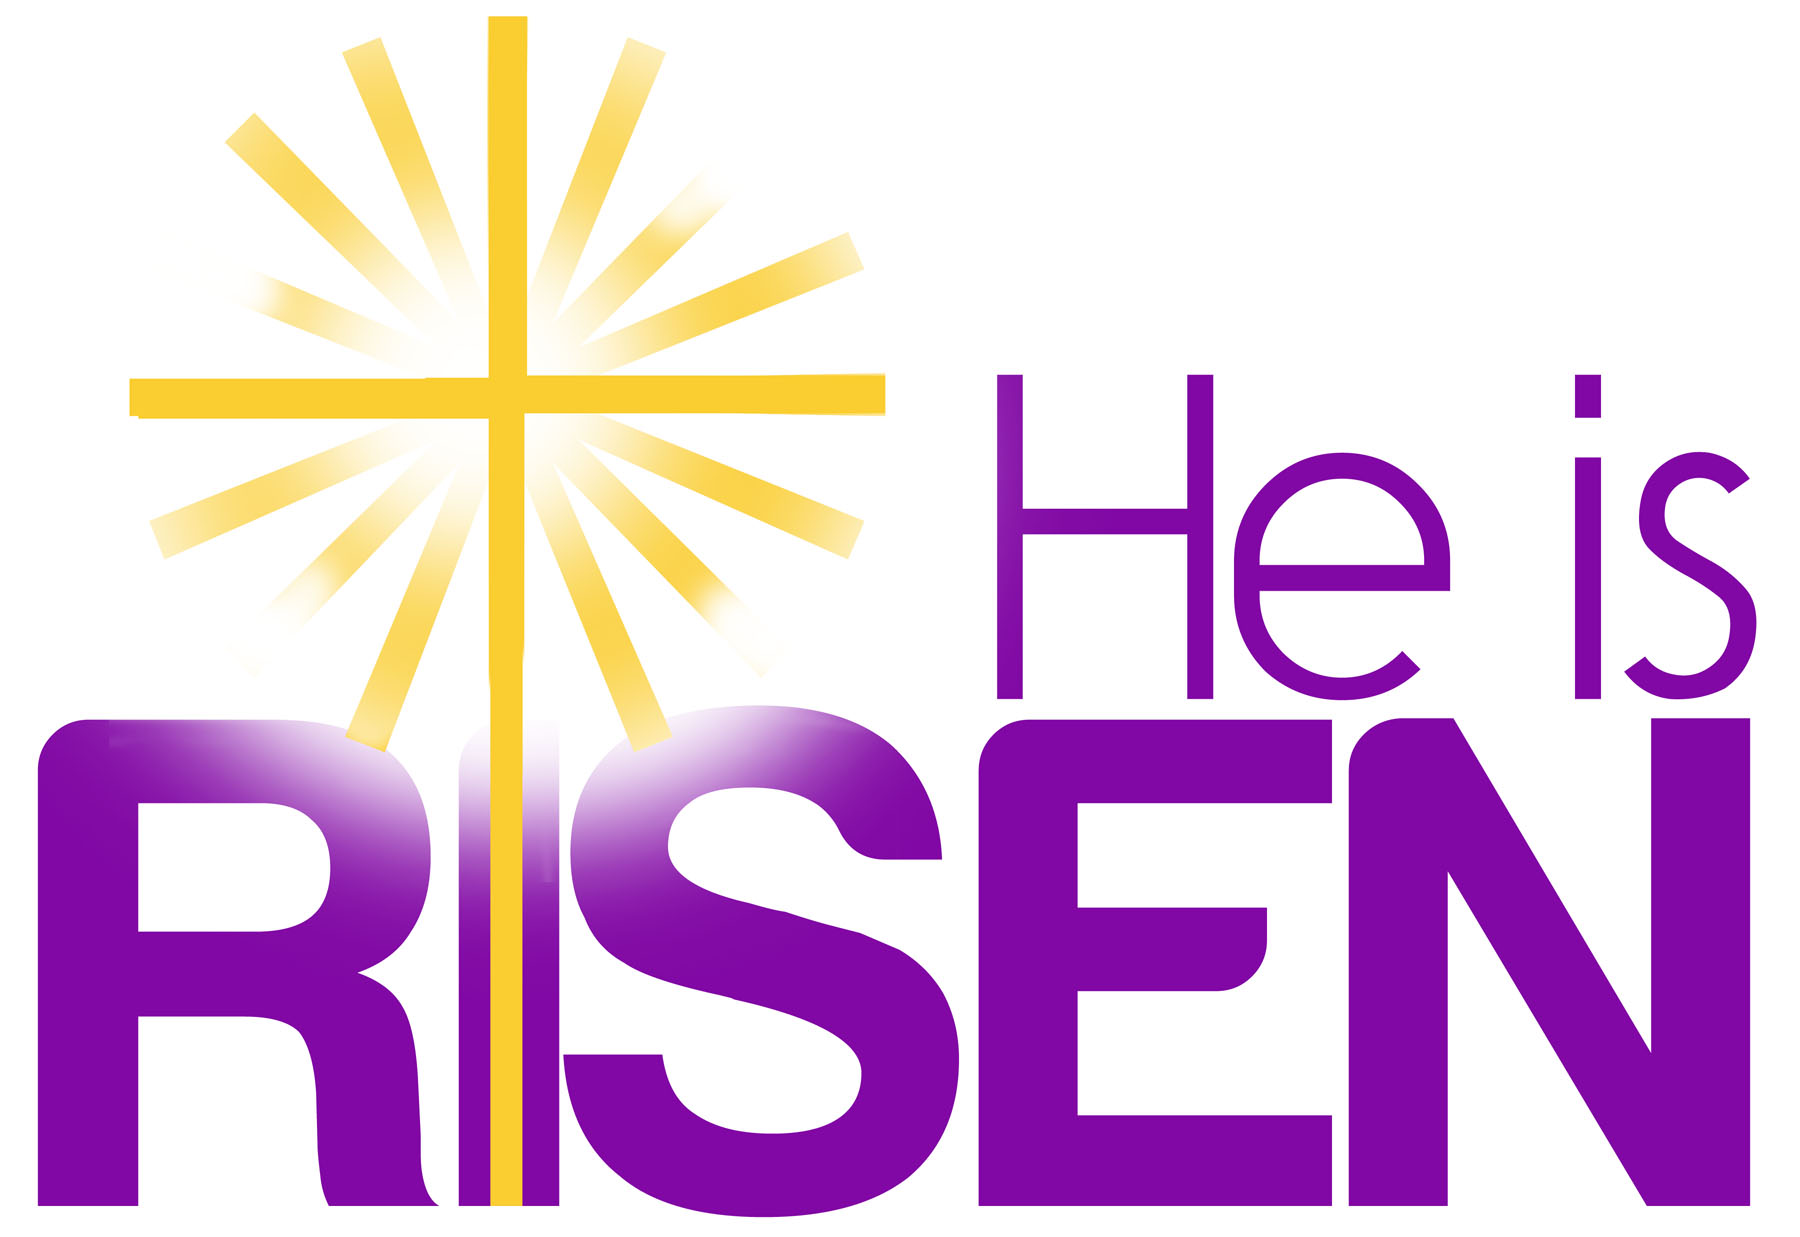 Images of Free Easter Clipart Religious - Jefney